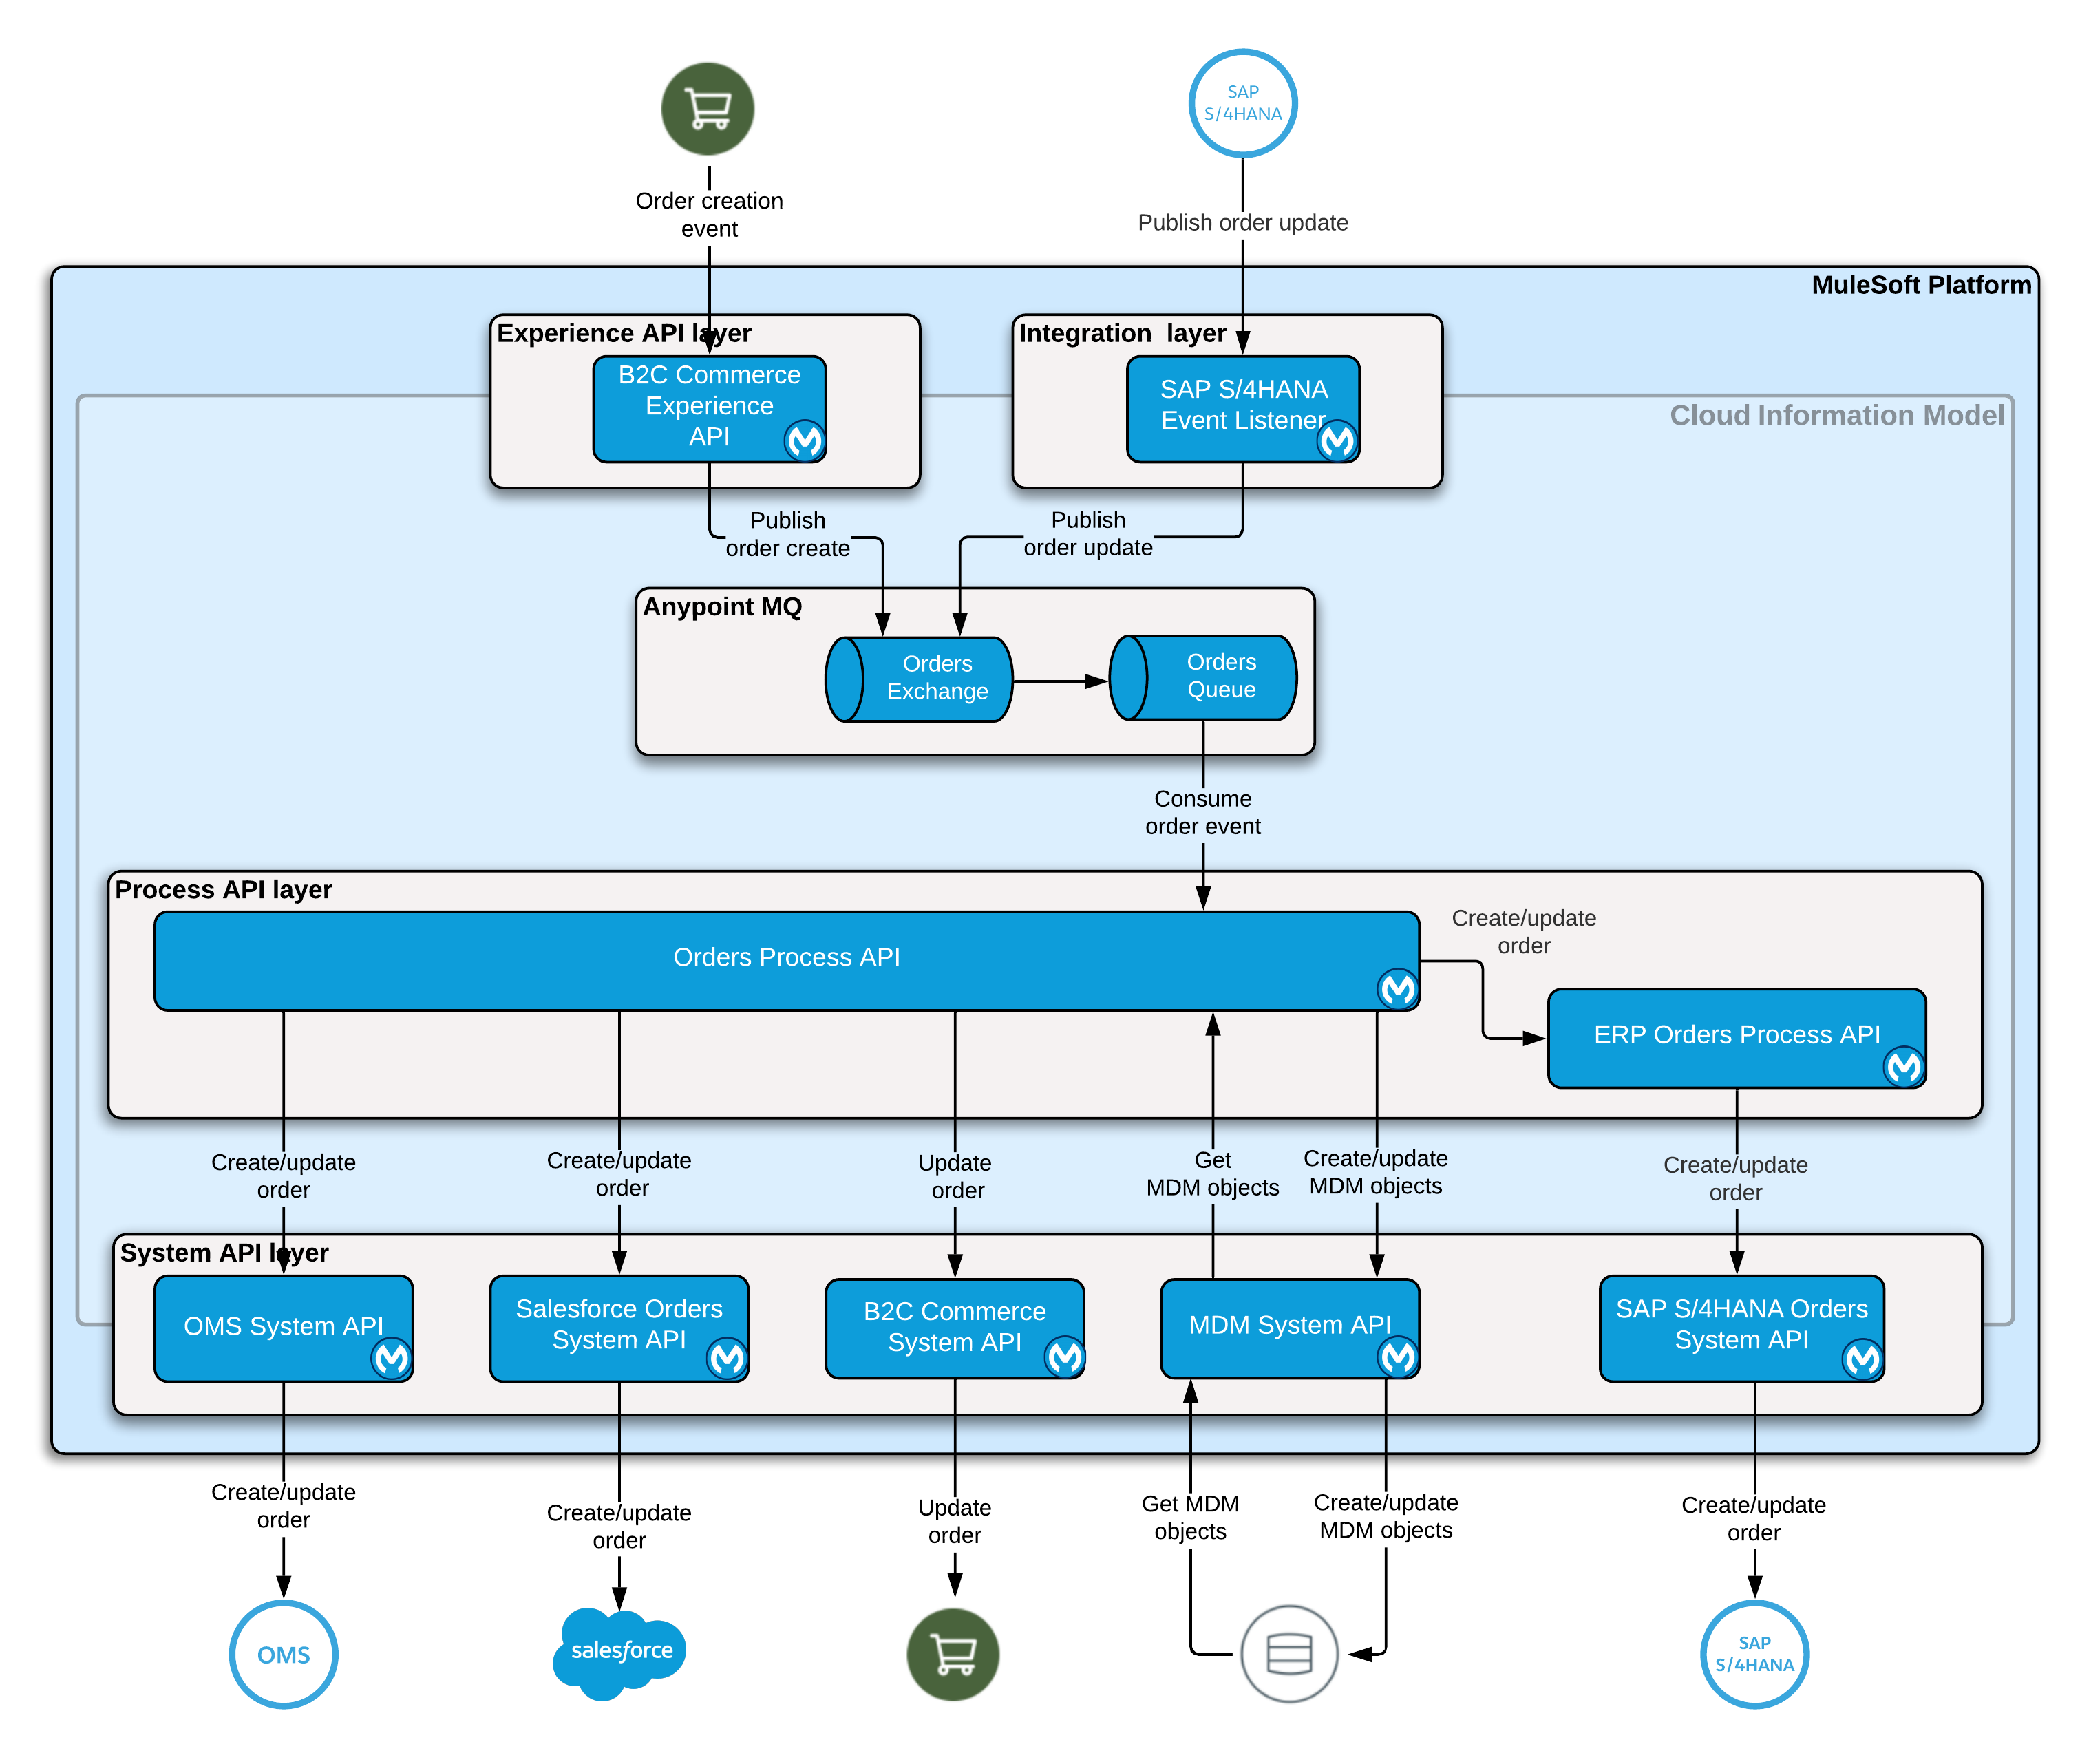 MuleSoft Accelerator for Retail - Use case 2 - Sales order sync